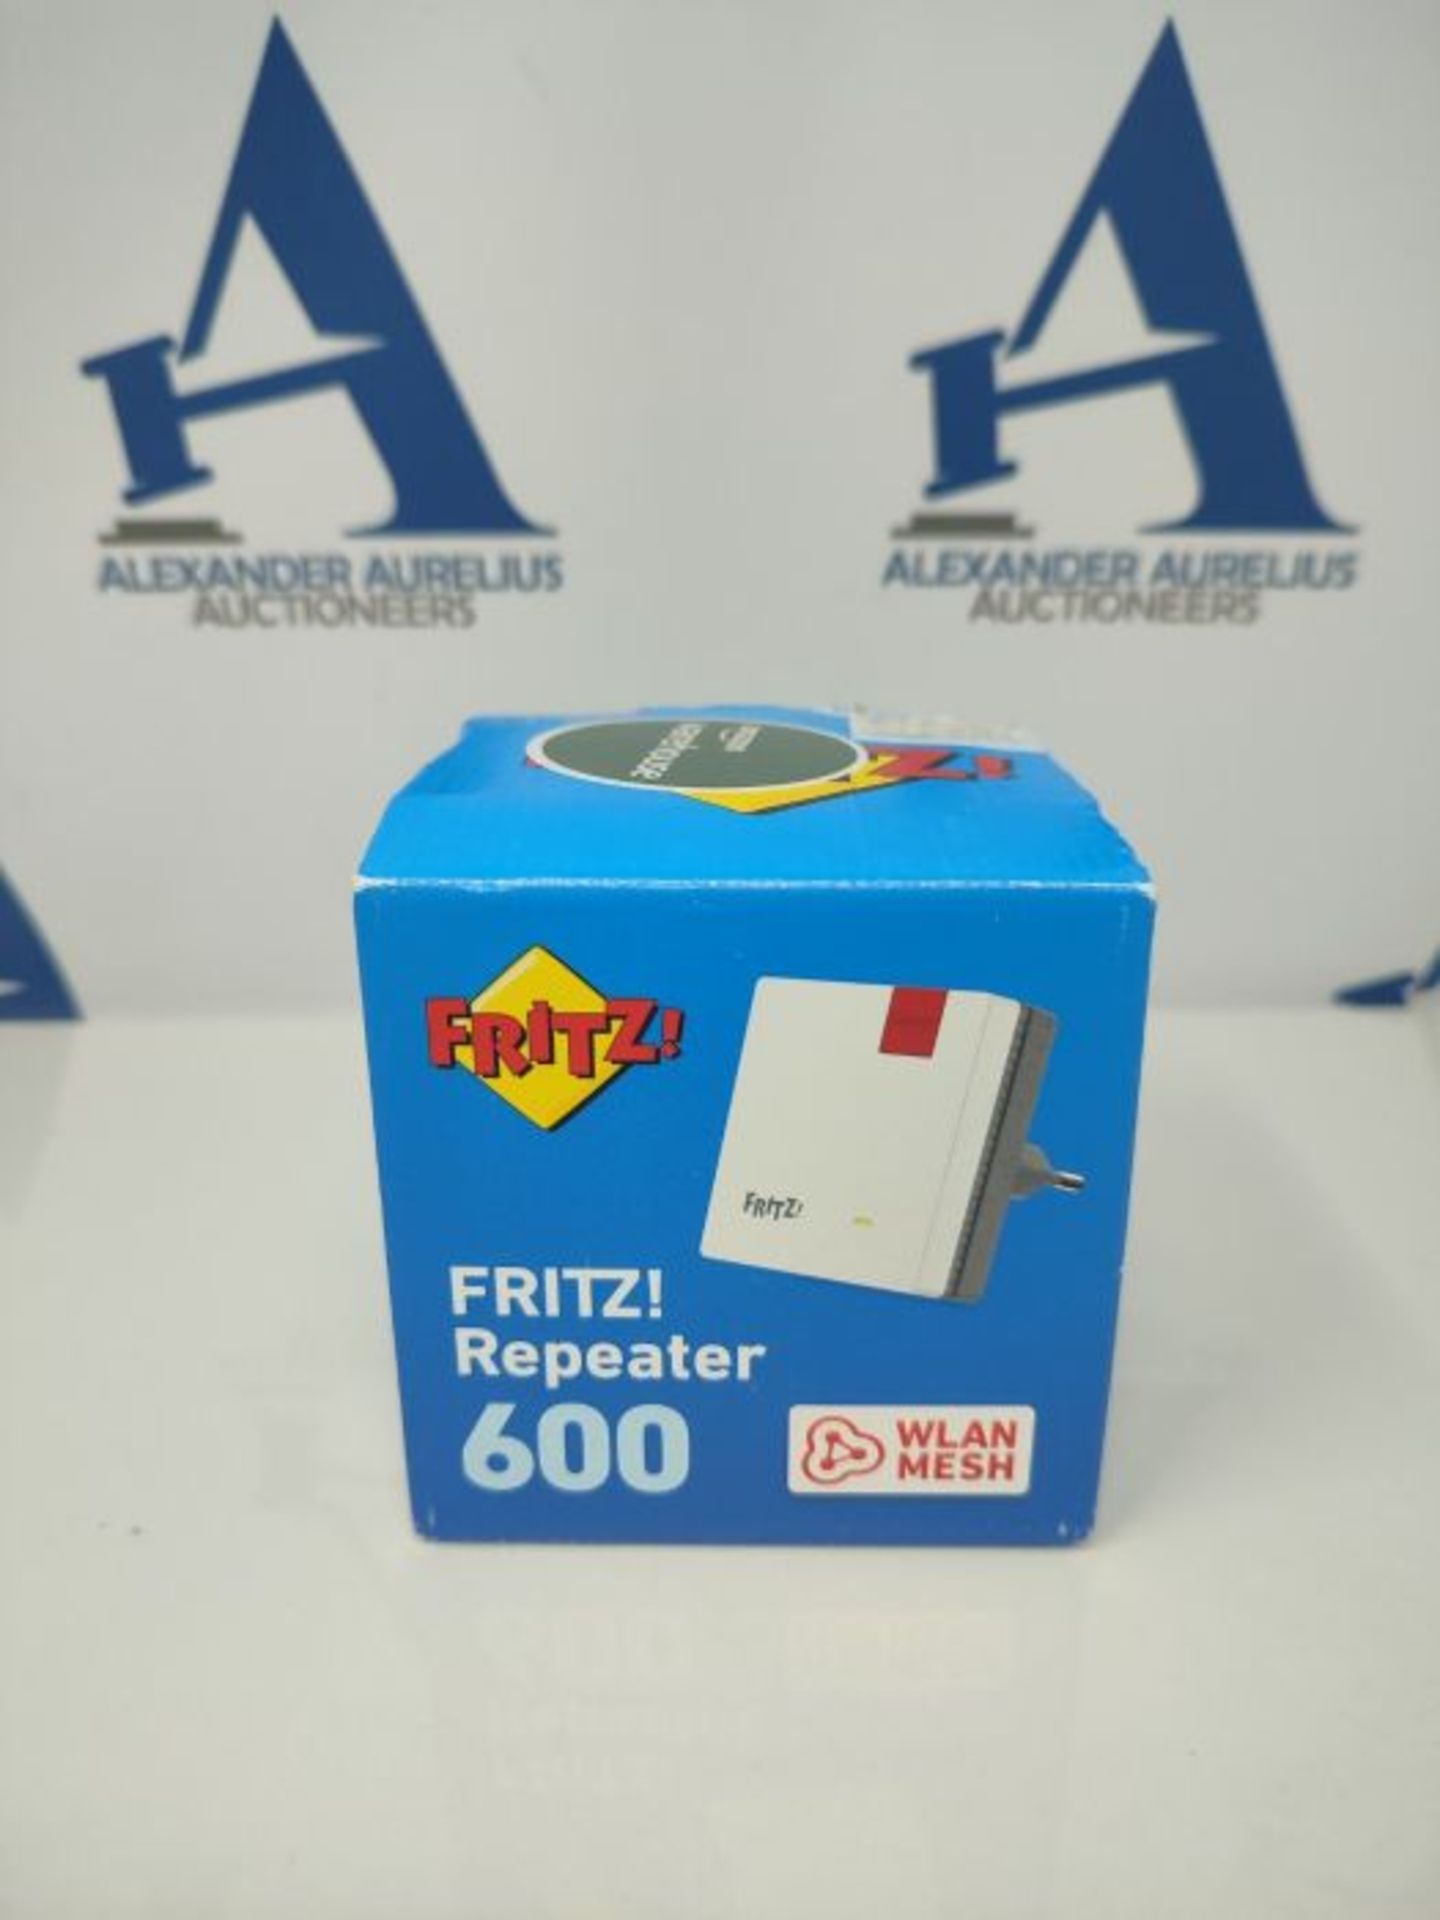 AVM FRITZ!Repeater 600 - Repeater - WLAN - Image 2 of 3